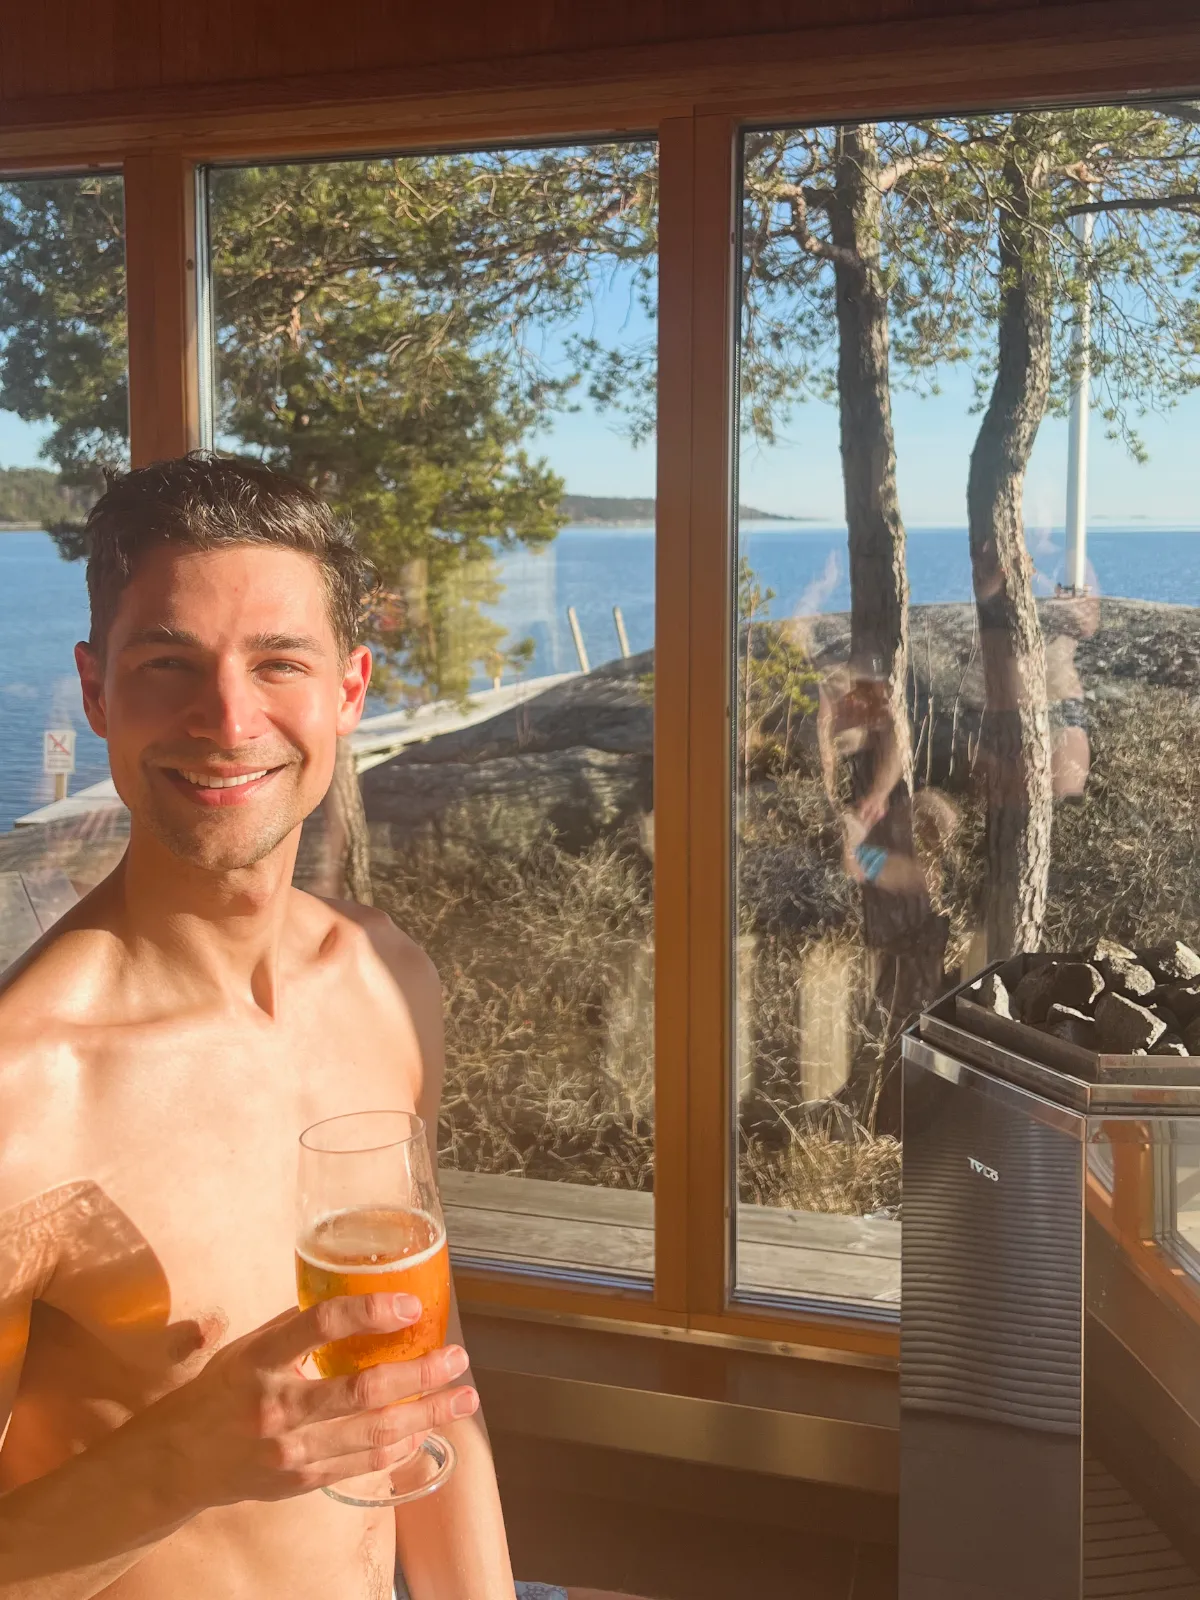 Jeremiah holding a beer in a sauna with a view of the archipelago out of the window